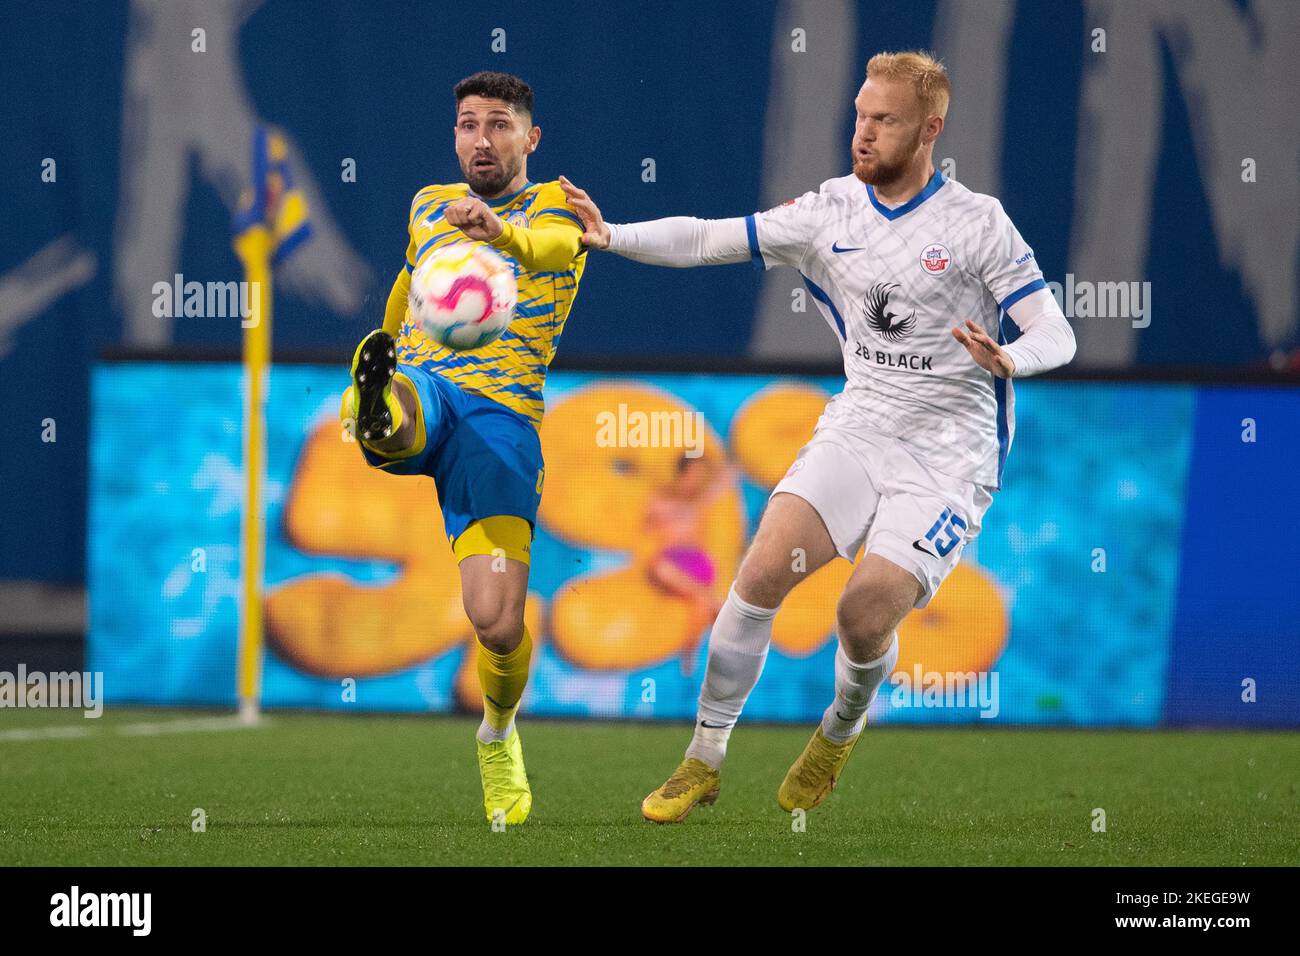 Brunswick, Germany. 12th Nov, 2022. Soccer: 2. Bundesliga, Eintracht Braunschweig - Hansa Rostock, Matchday 17, Eintracht-Stadion. Braunschweig's Fabio Kaufmann (l) plays against Rostock's Nils Fröling. Credit: Swen Pförtner/dpa - IMPORTANT NOTE: In accordance with the requirements of the DFL Deutsche Fußball Liga and the DFB Deutscher Fußball-Bund, it is prohibited to use or have used photographs taken in the stadium and/or of the match in the form of sequence pictures and/or video-like photo series./dpa/Alamy Live News Stock Photo